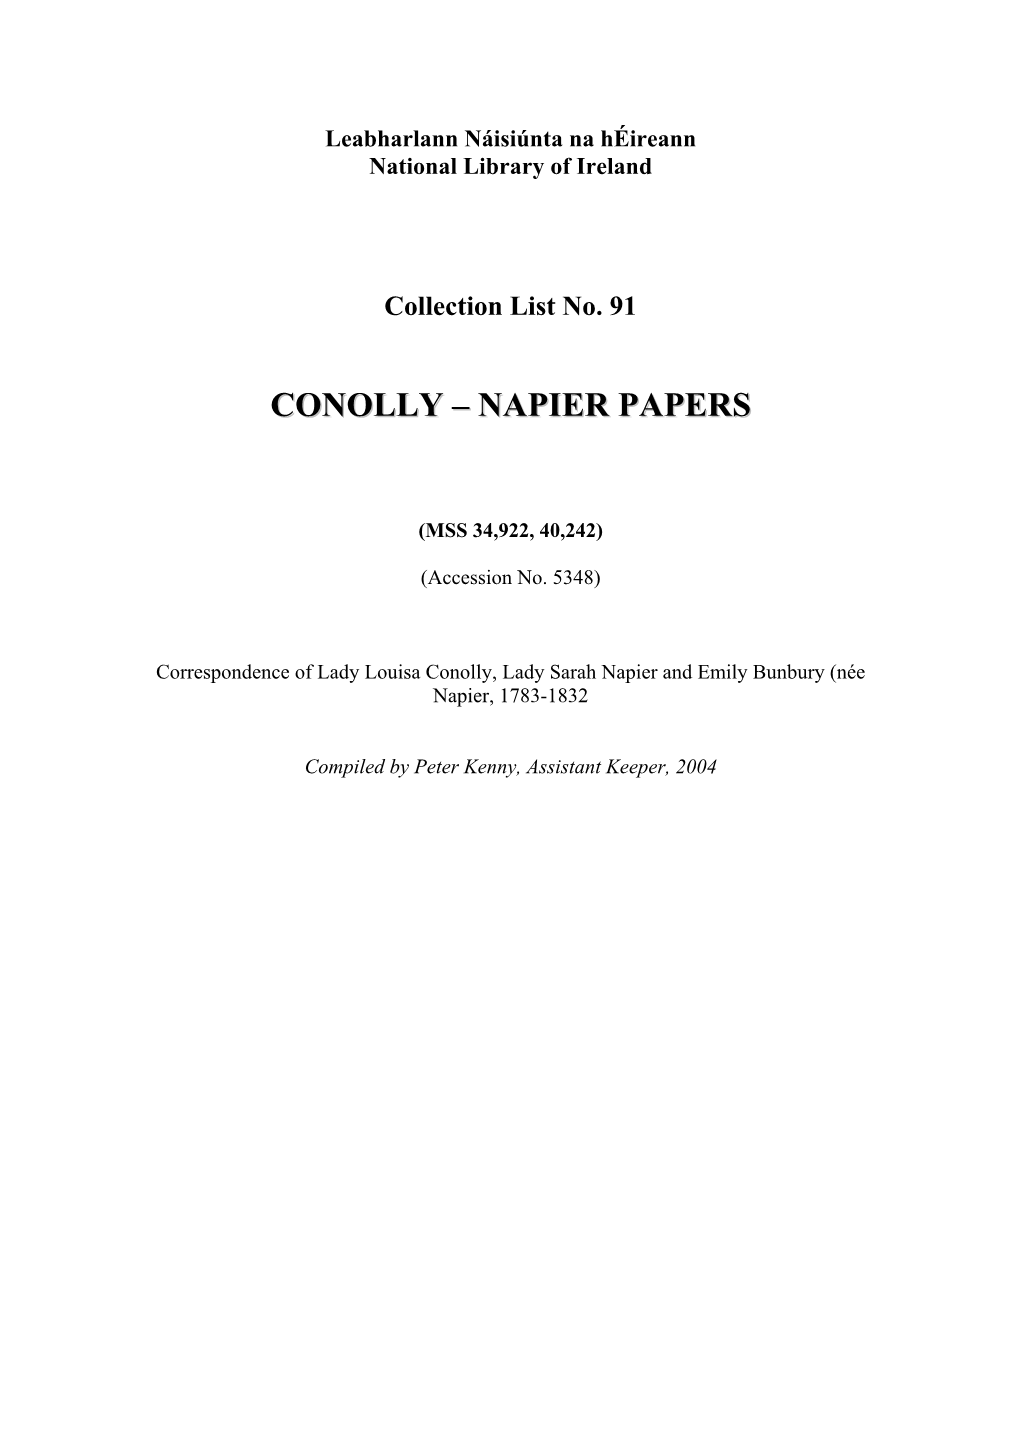 Conolly – Napier Papers